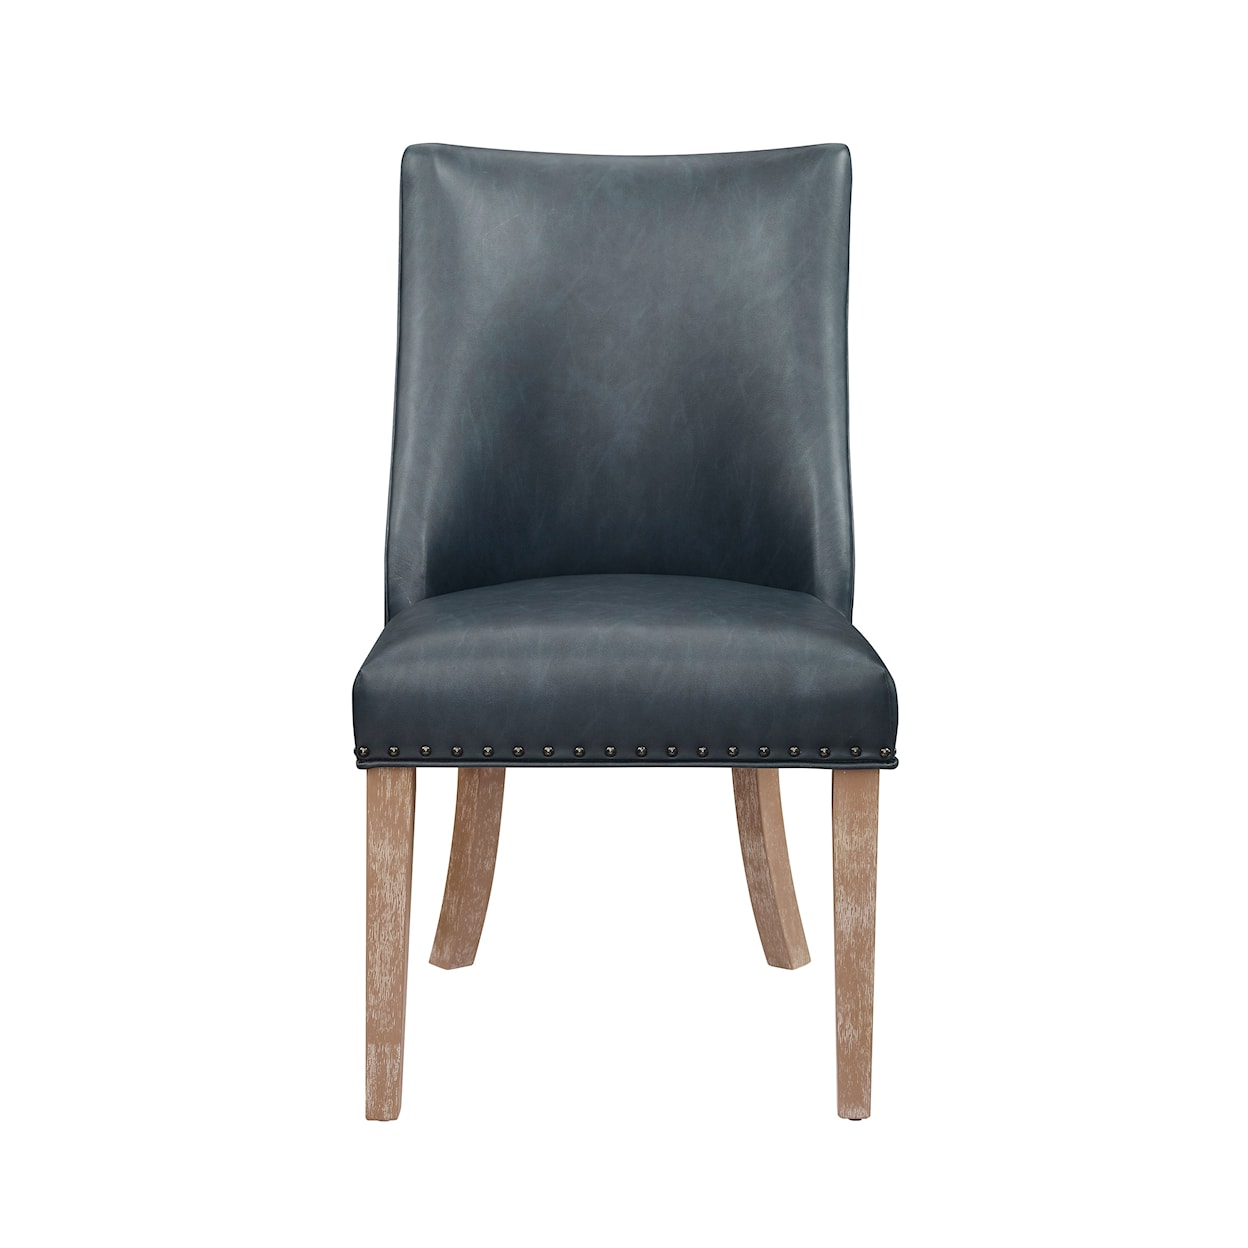 Powell Adler Dining Chair with Faux Leather Upholstery